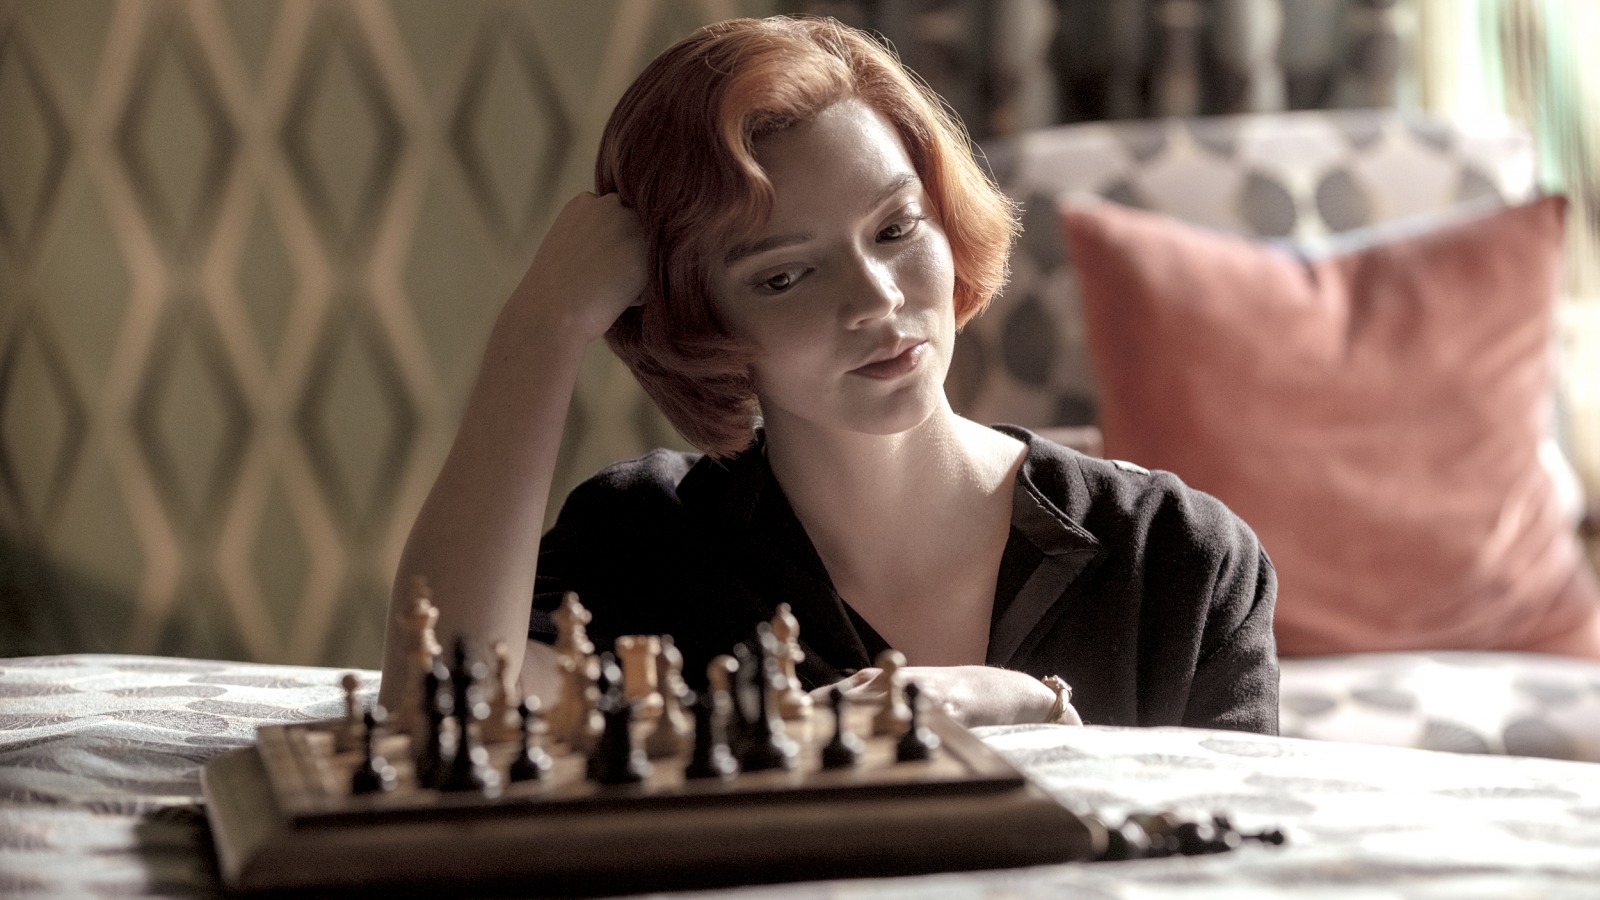 The Queen's Gambit Season 2: What to Expect - The Regency Chess